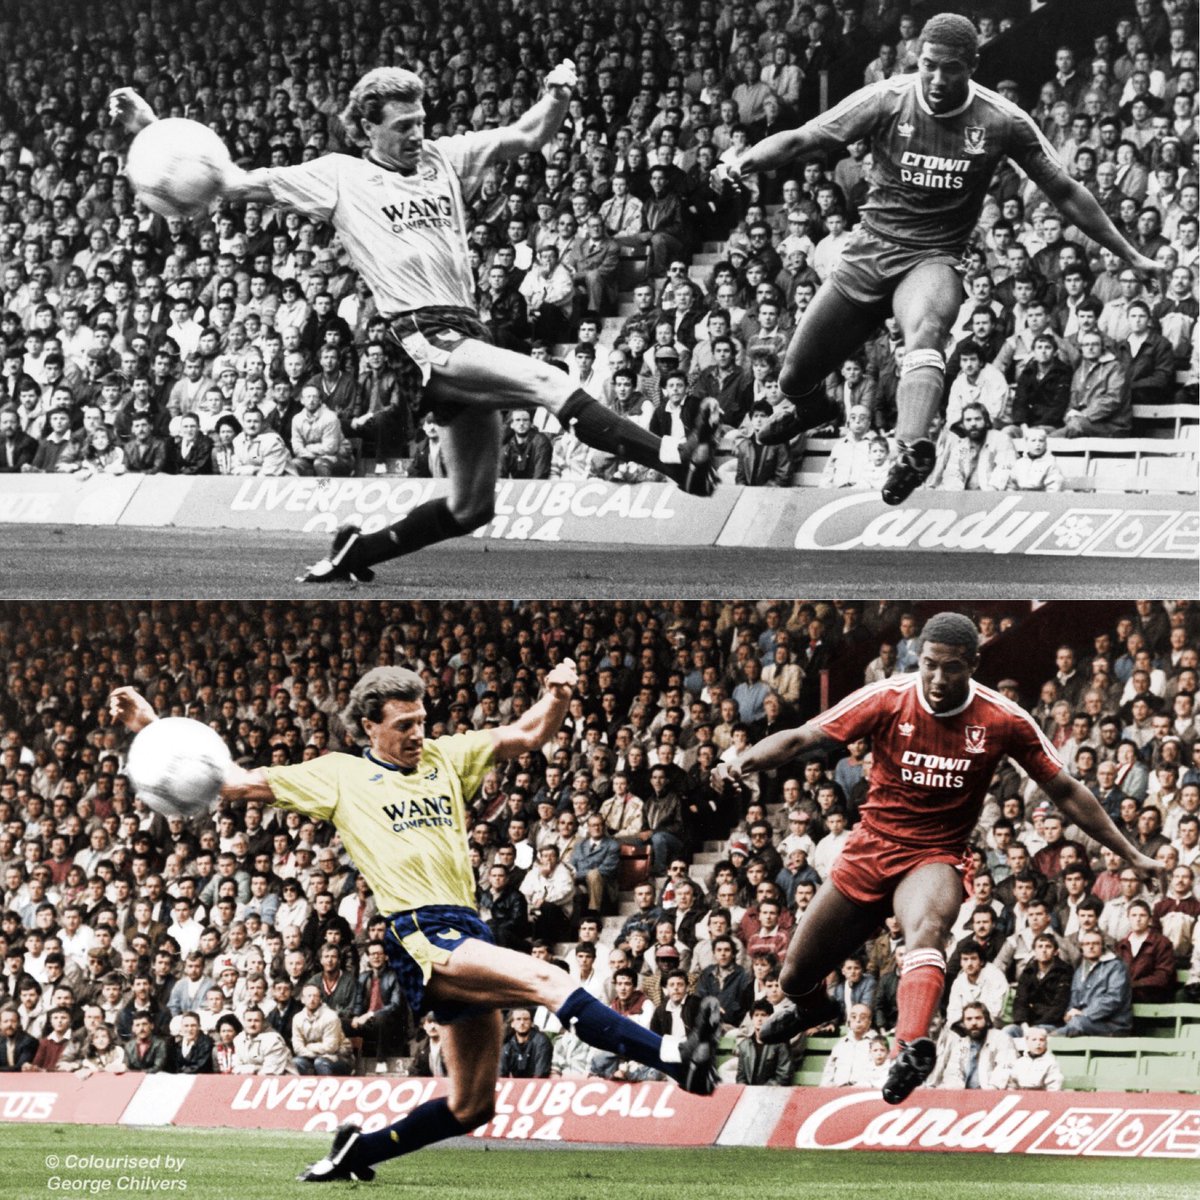 Anfield. 12 September 1987. John Barnes in full flight on his home debut v Oxford United, a game in which he scored his first competitive #LFC goal. As #BlackHistoryMonth2023 draws to a close let’s remember just how special a player he was and the massive impact he made back then